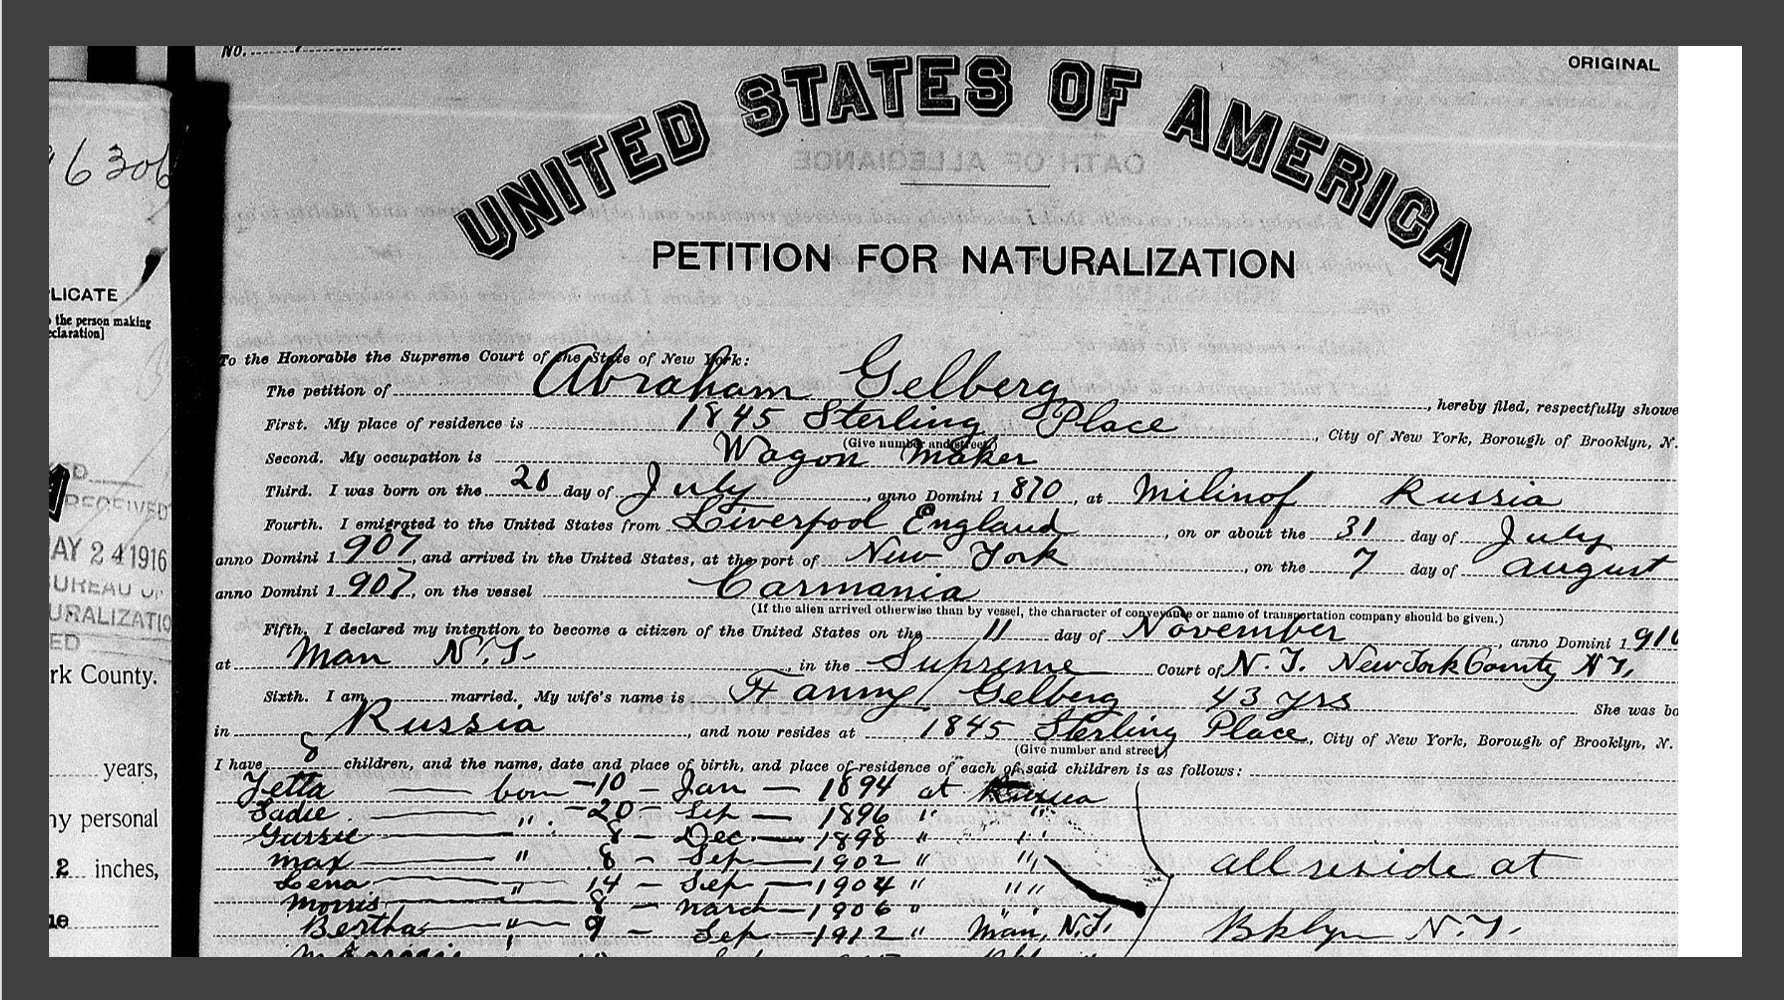 Abraham Gelberg's Petition for Naturalization